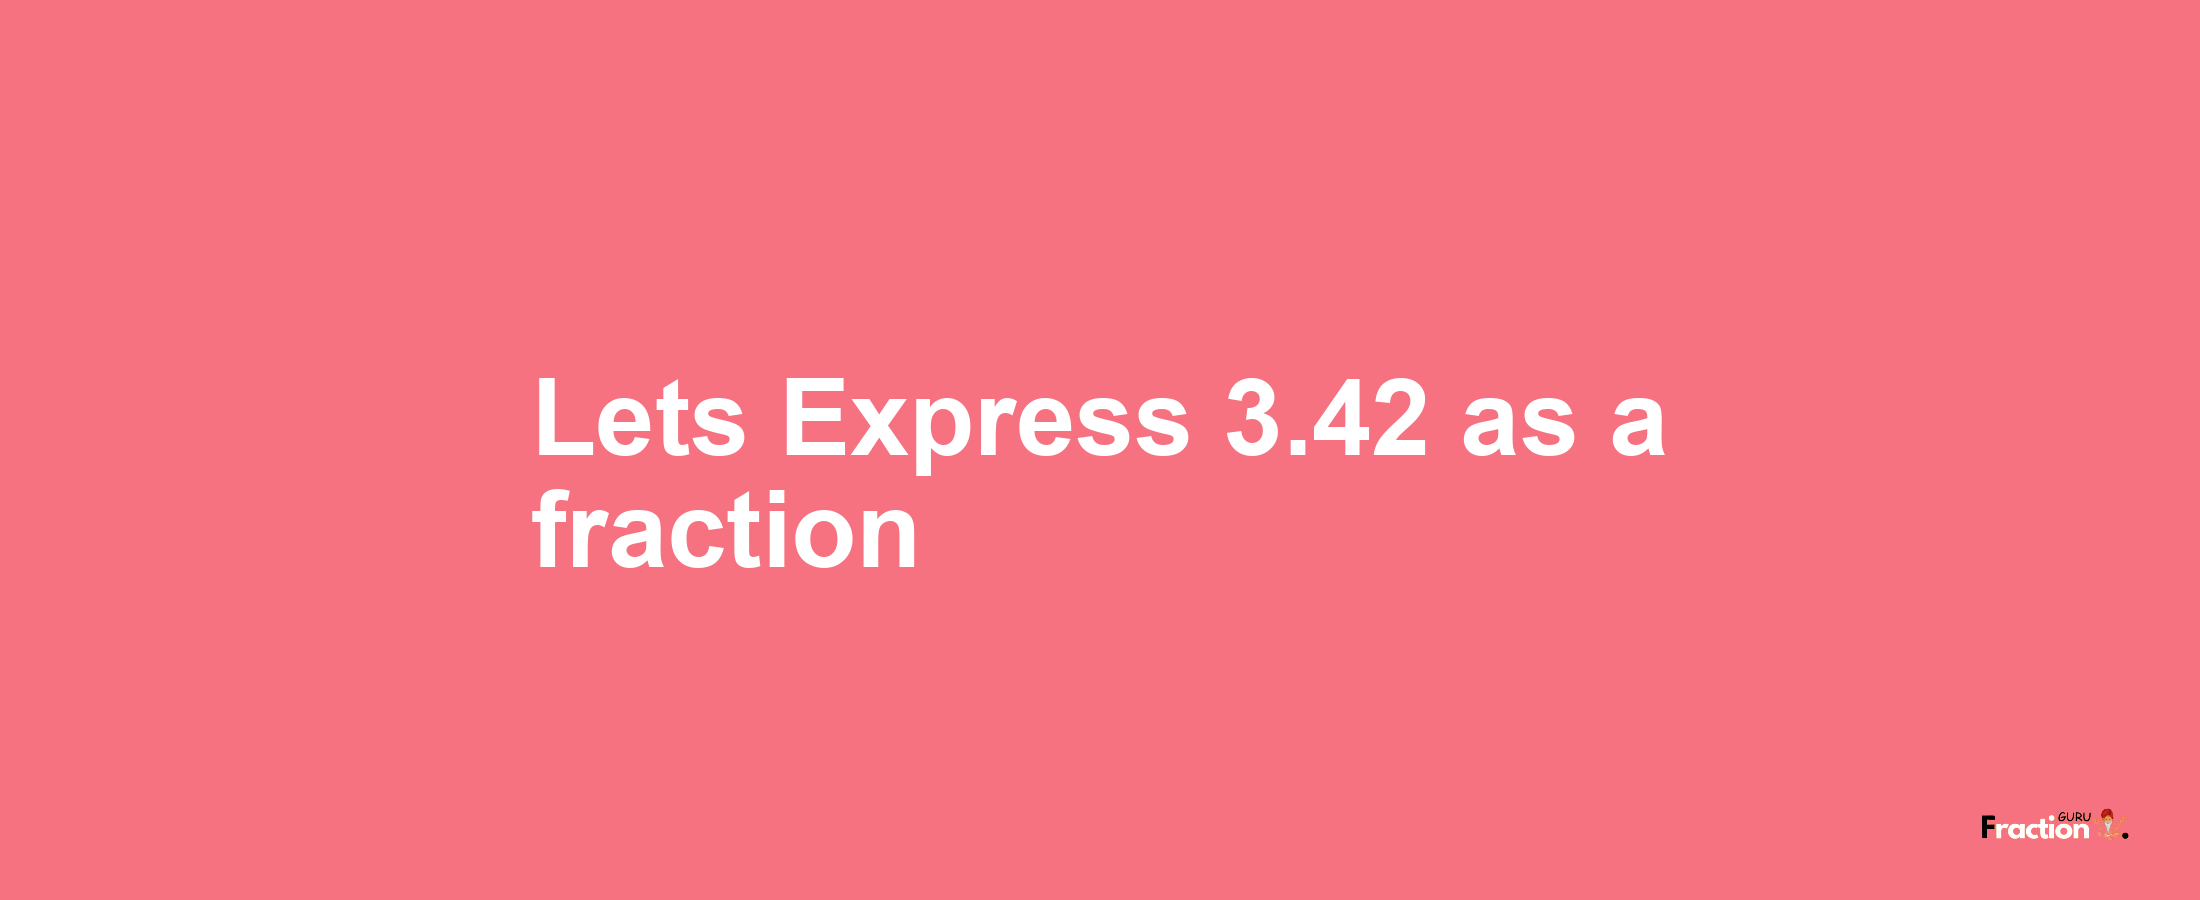 Lets Express 3.42 as afraction